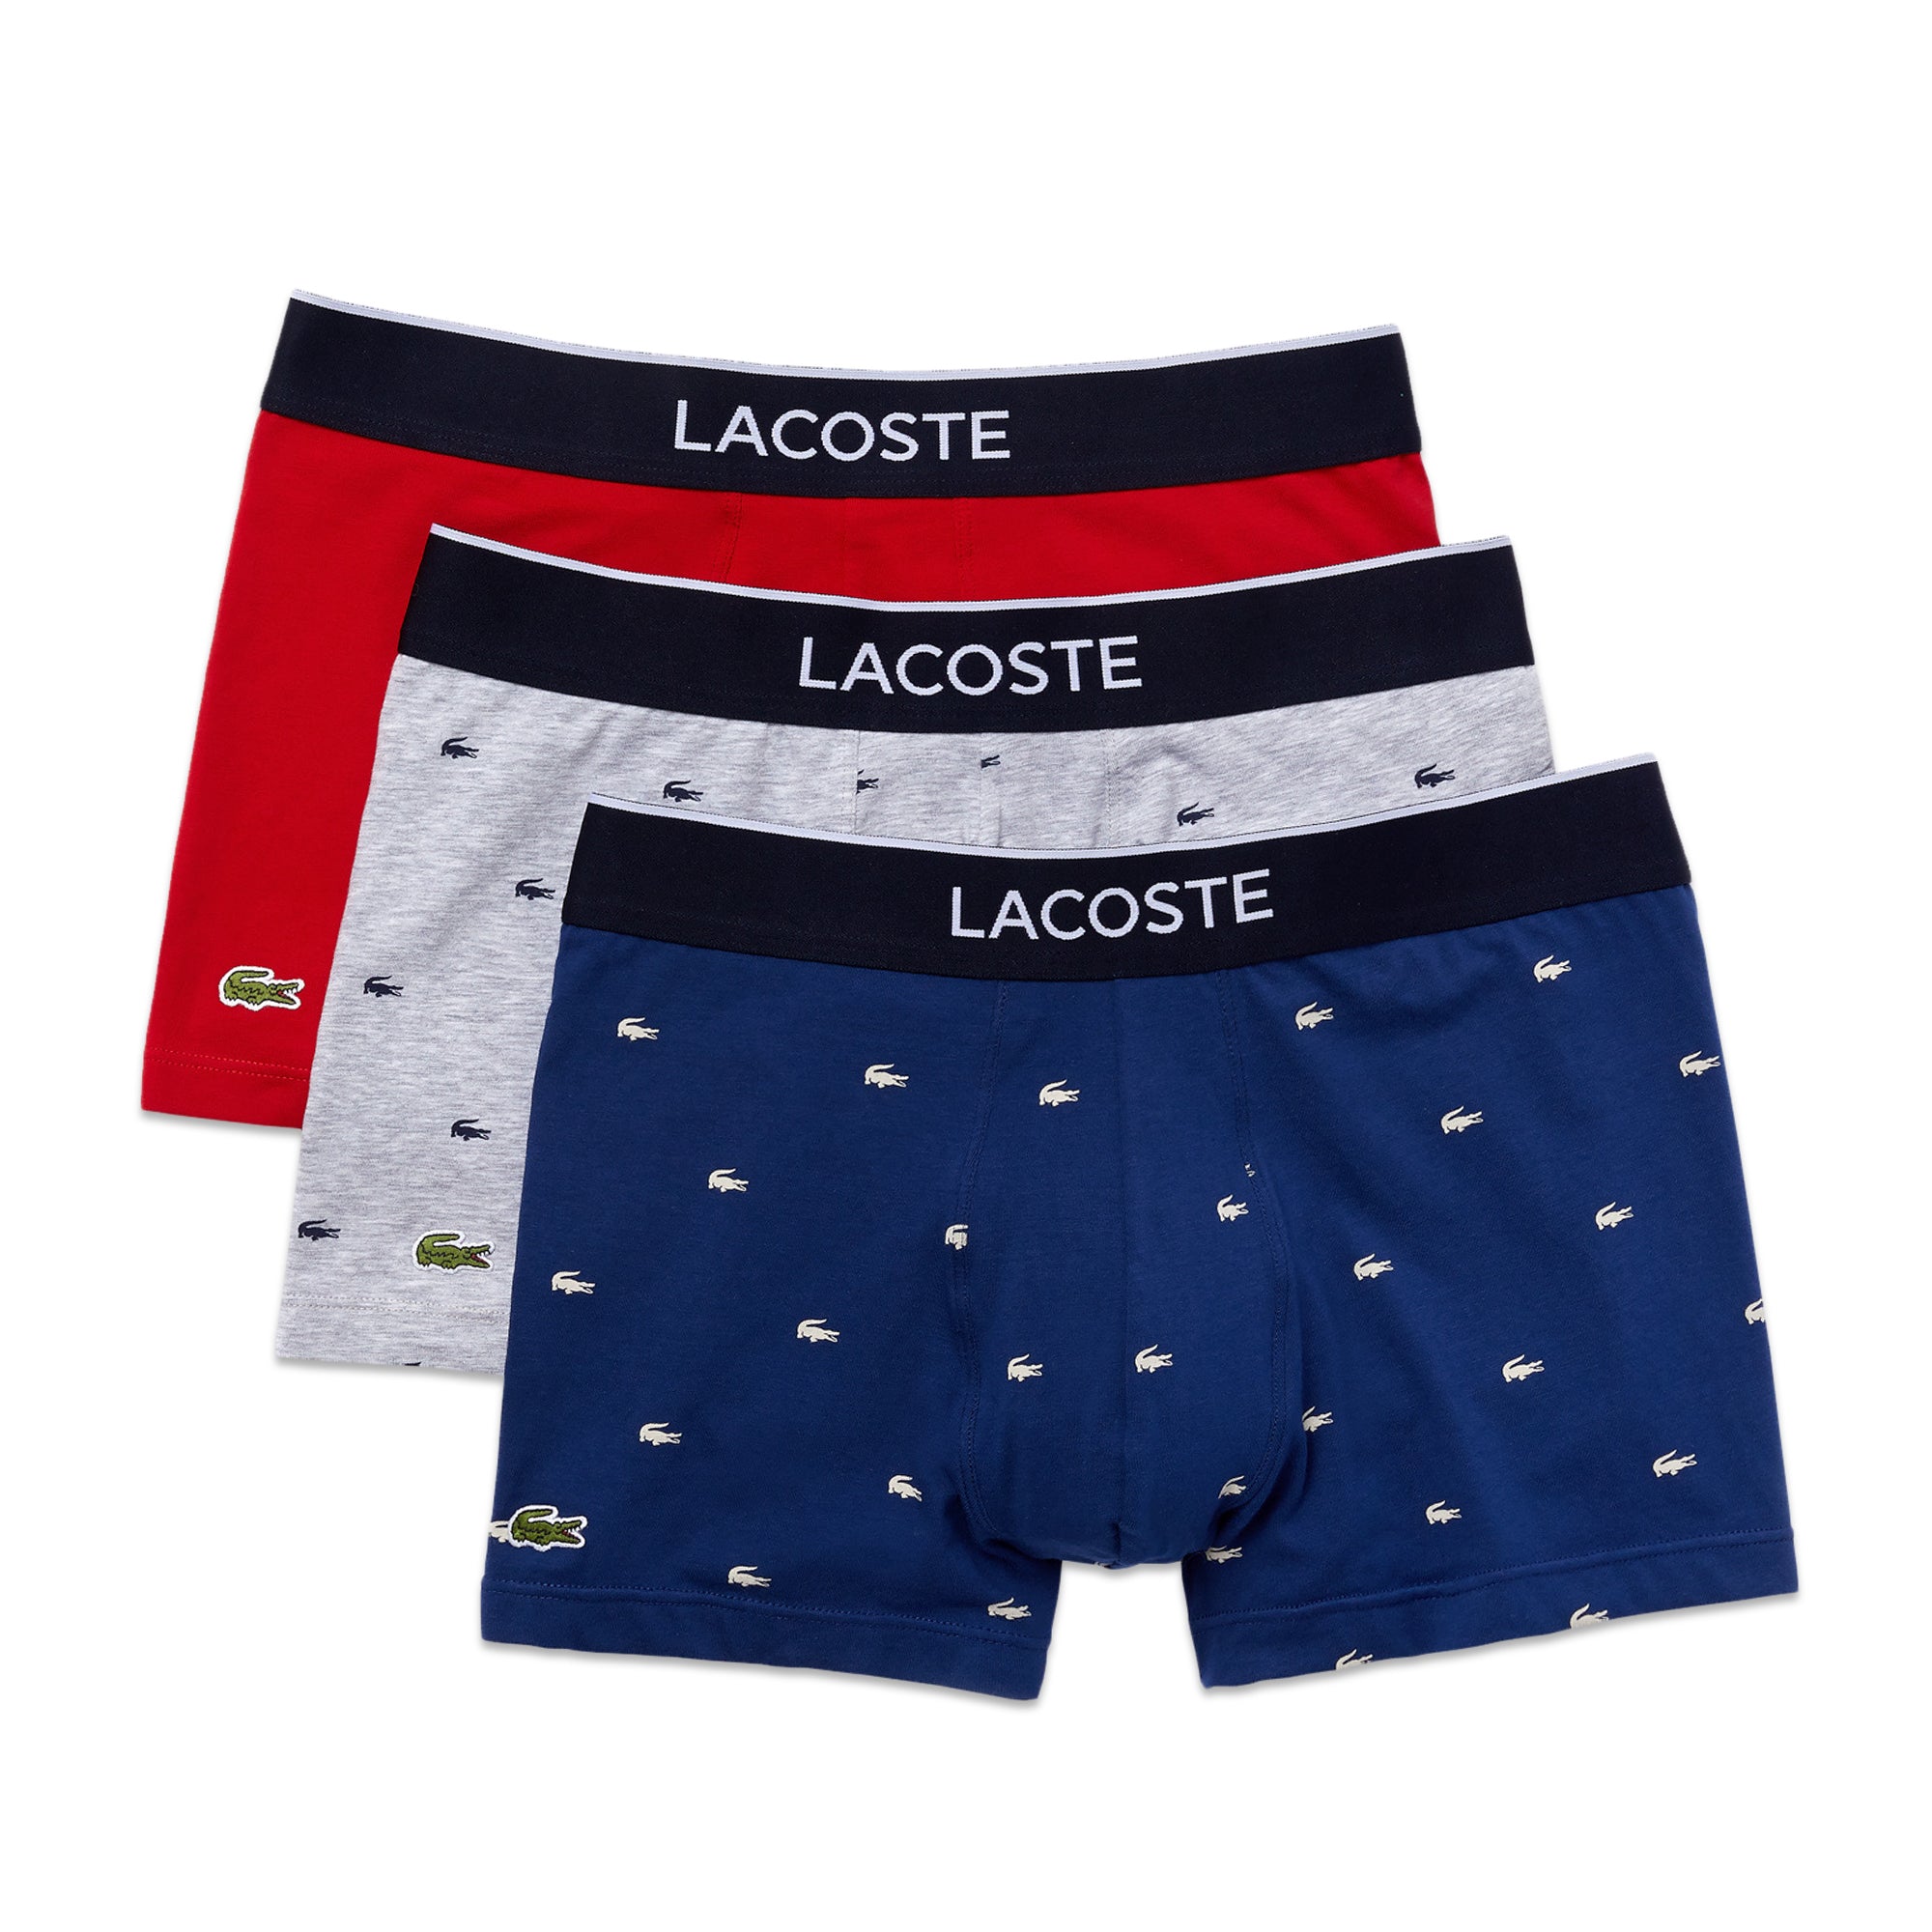 Lacoste 3 Pack Cotton Stretch Trunks - Grey/Red/Navy Crocs